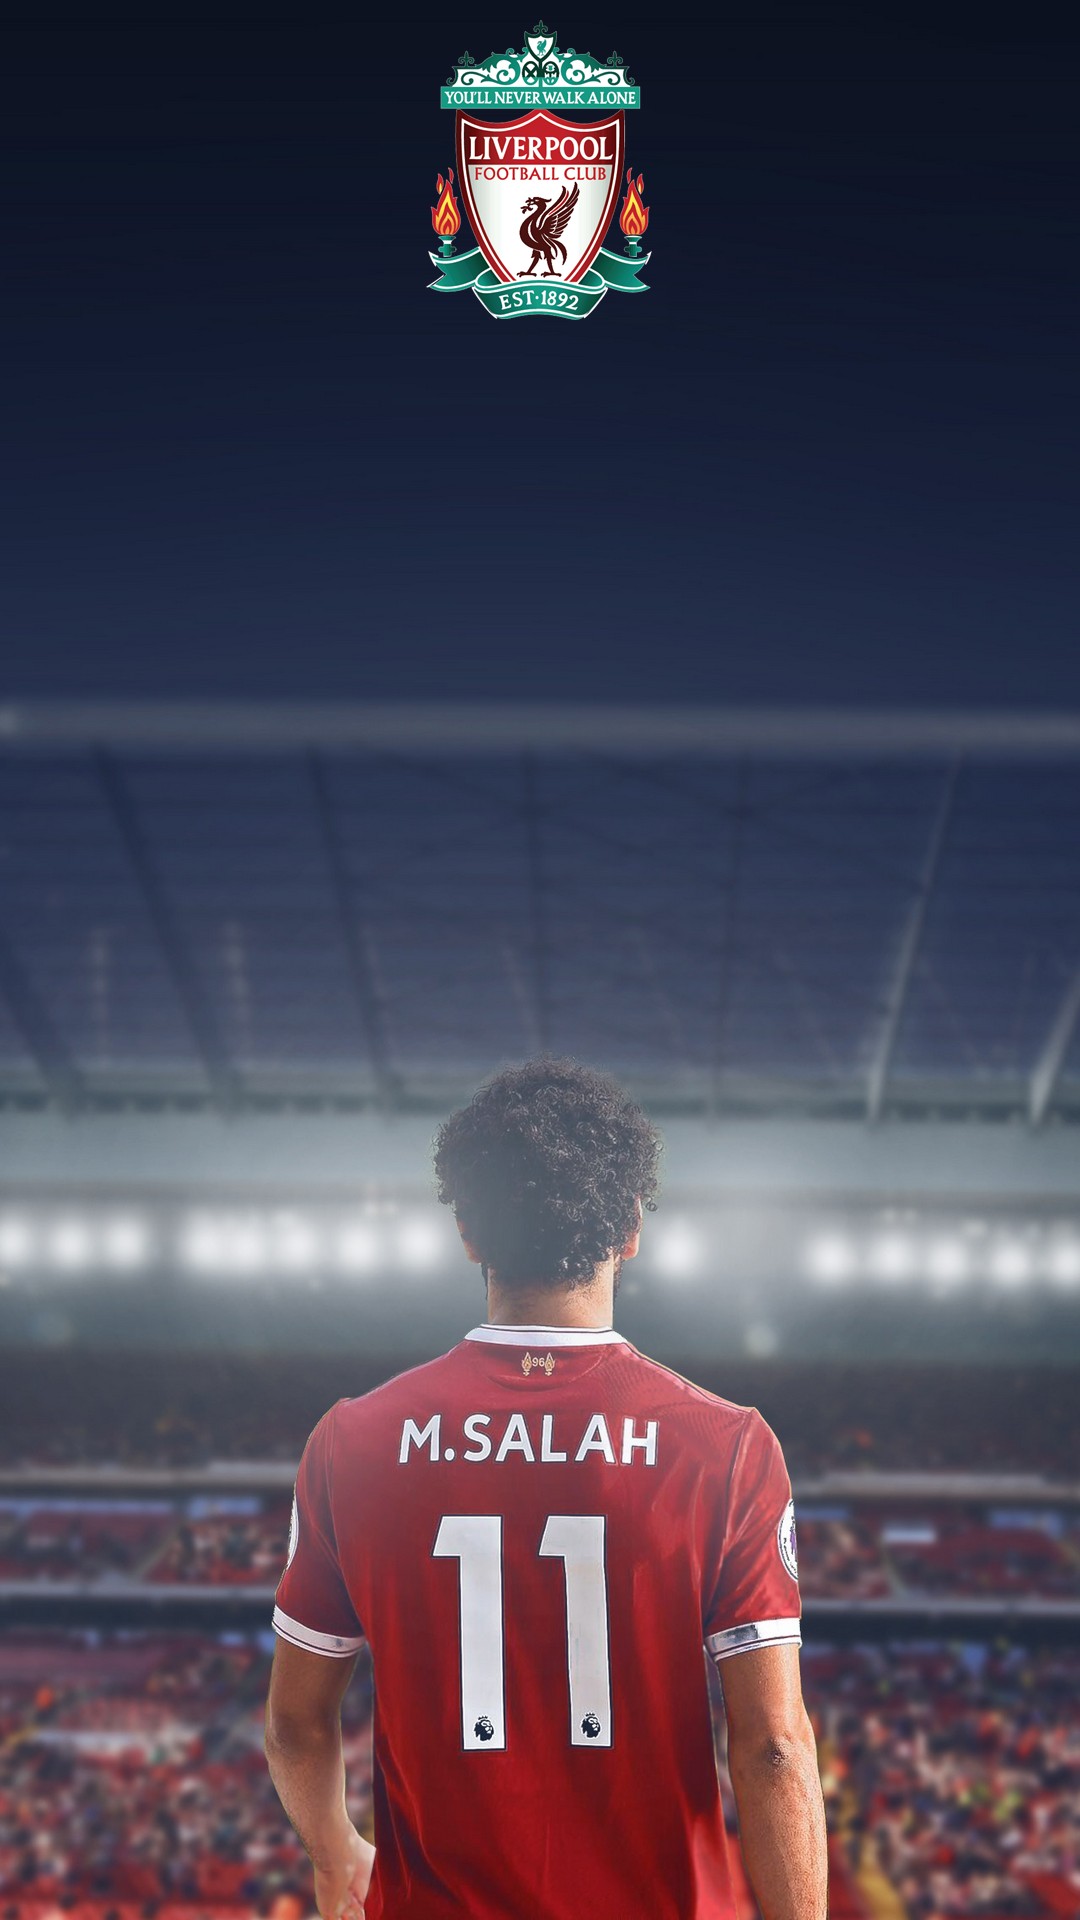 Wallpapers Phone Mohamed Salah with resolution 1080X1920 pixel. You can make this wallpaper for your Android backgrounds, Tablet, Smartphones Screensavers and Mobile Phone Lock Screen